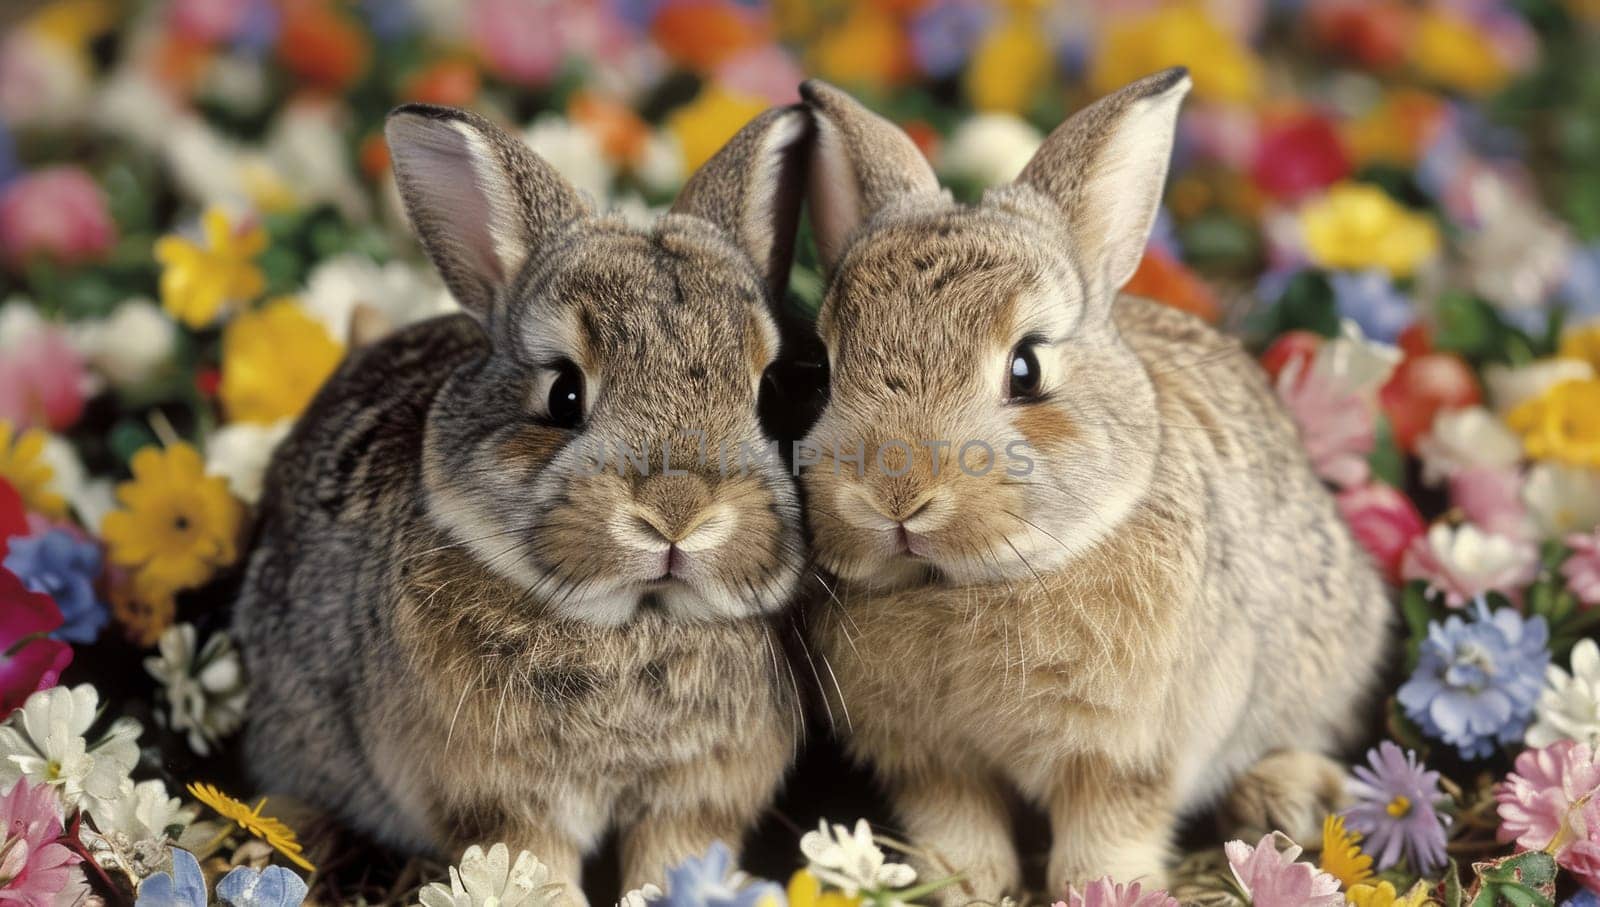 Two adorable rabbits snuggling in a field of colorful flowers by ailike